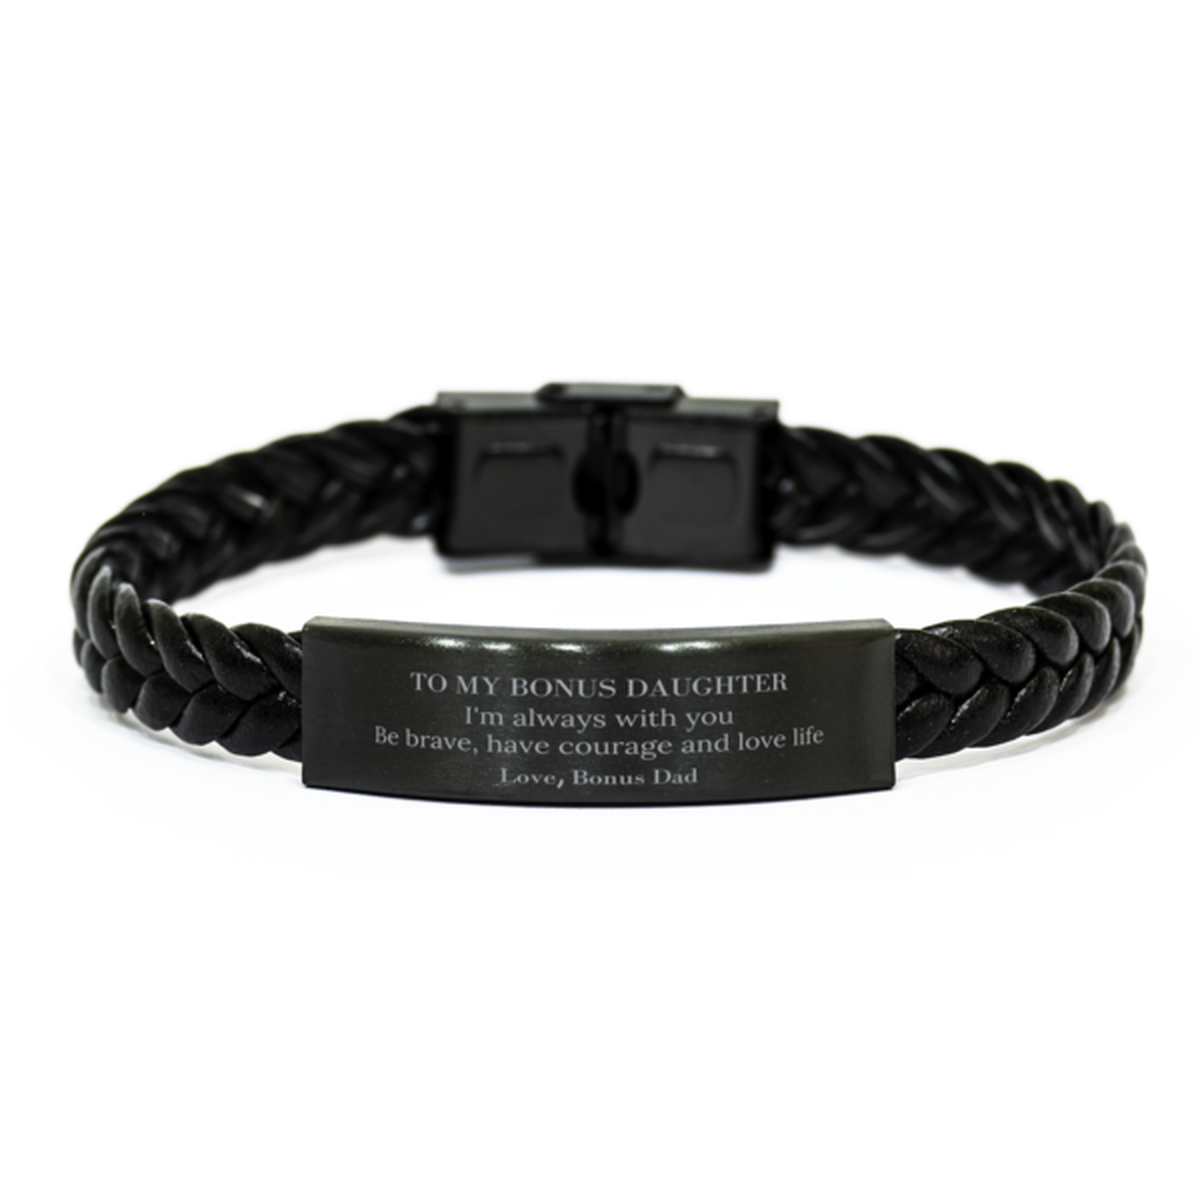 To My Bonus Daughter Gifts from Bonus Dad, Unique Braided Leather Bracelet Inspirational Christmas Birthday Graduation Gifts for Bonus Daughter I'm always with you. Be brave, have courage and love life. Love, Bonus Dad